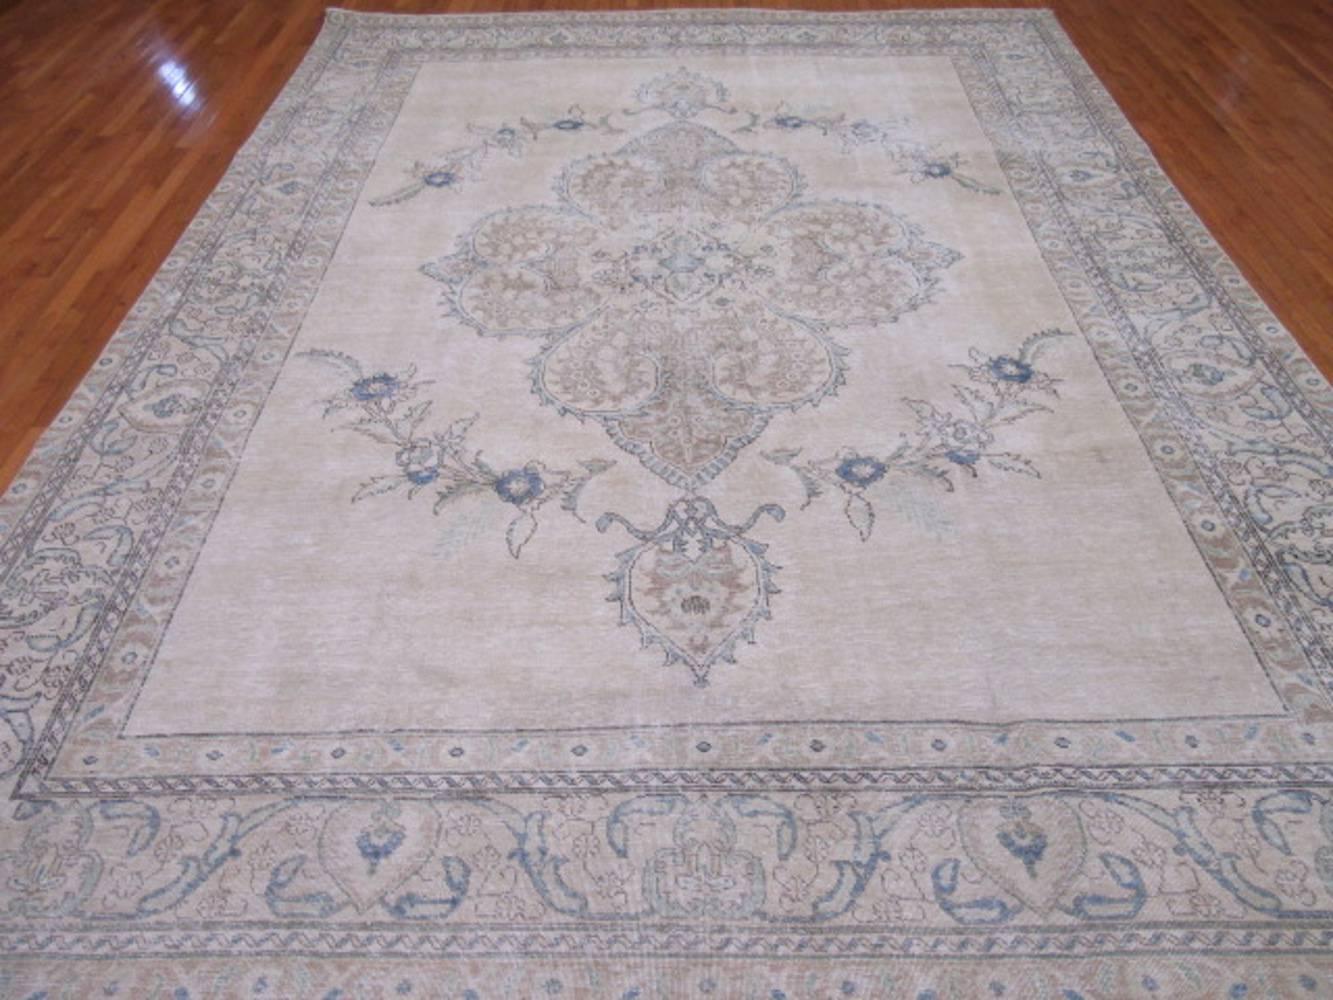 This is a beautiful hand-knotted distressed old Persian Tabriz rug. It has the cool contemporary and popular colors mixed with a more traditional pattern creating a great transitional rug to work with. It measures 9' 6'' x 12' 7'' and in good shape.